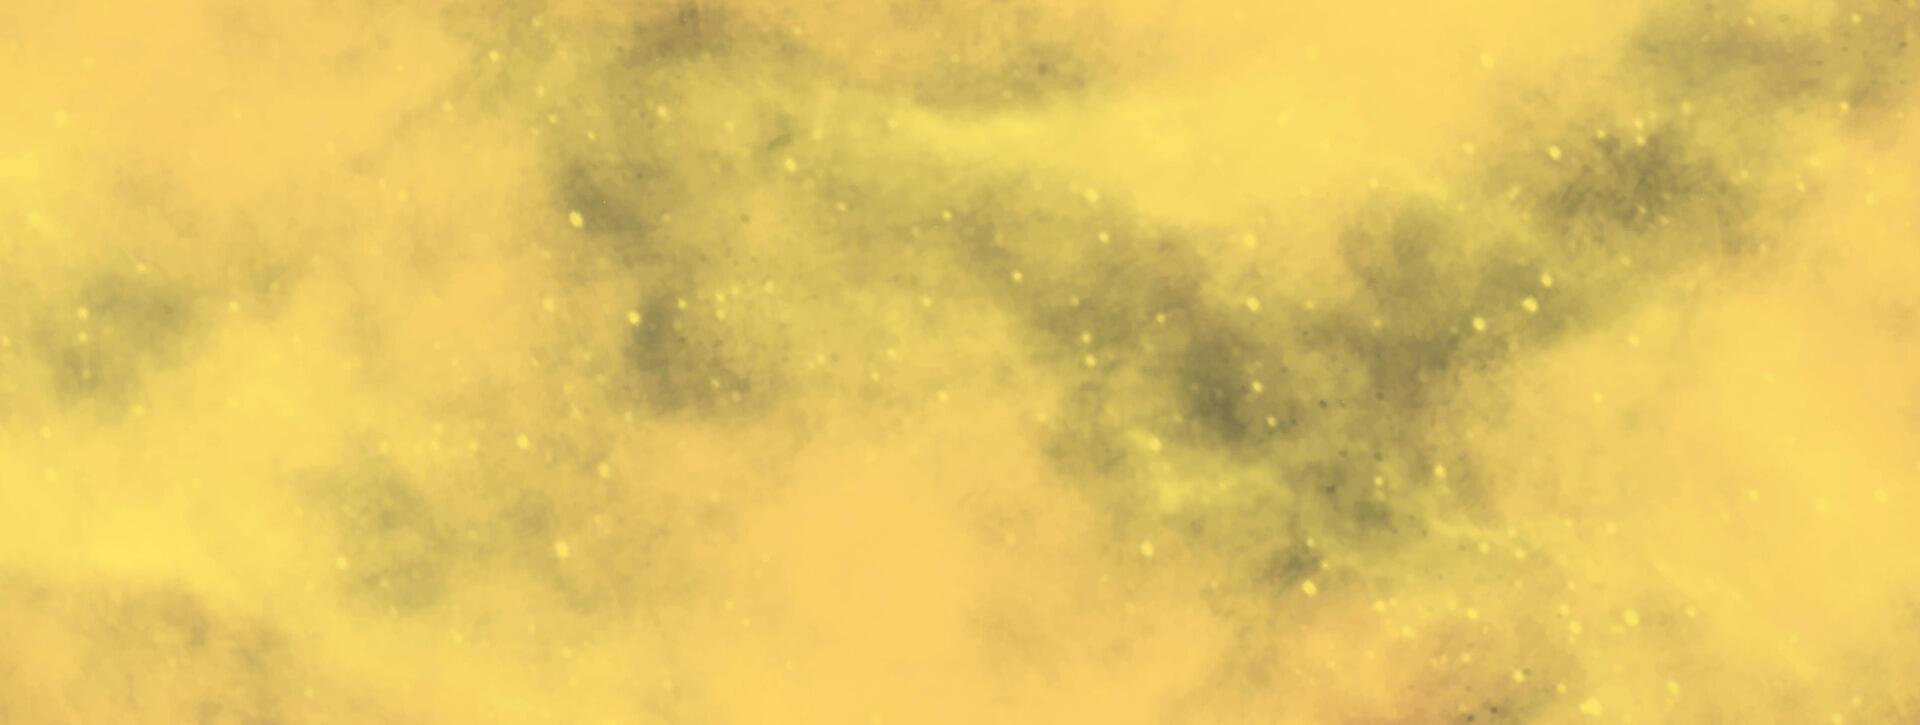 yellow watercolor background. background with dots. abstract yellow and black horizontal background texture. vector